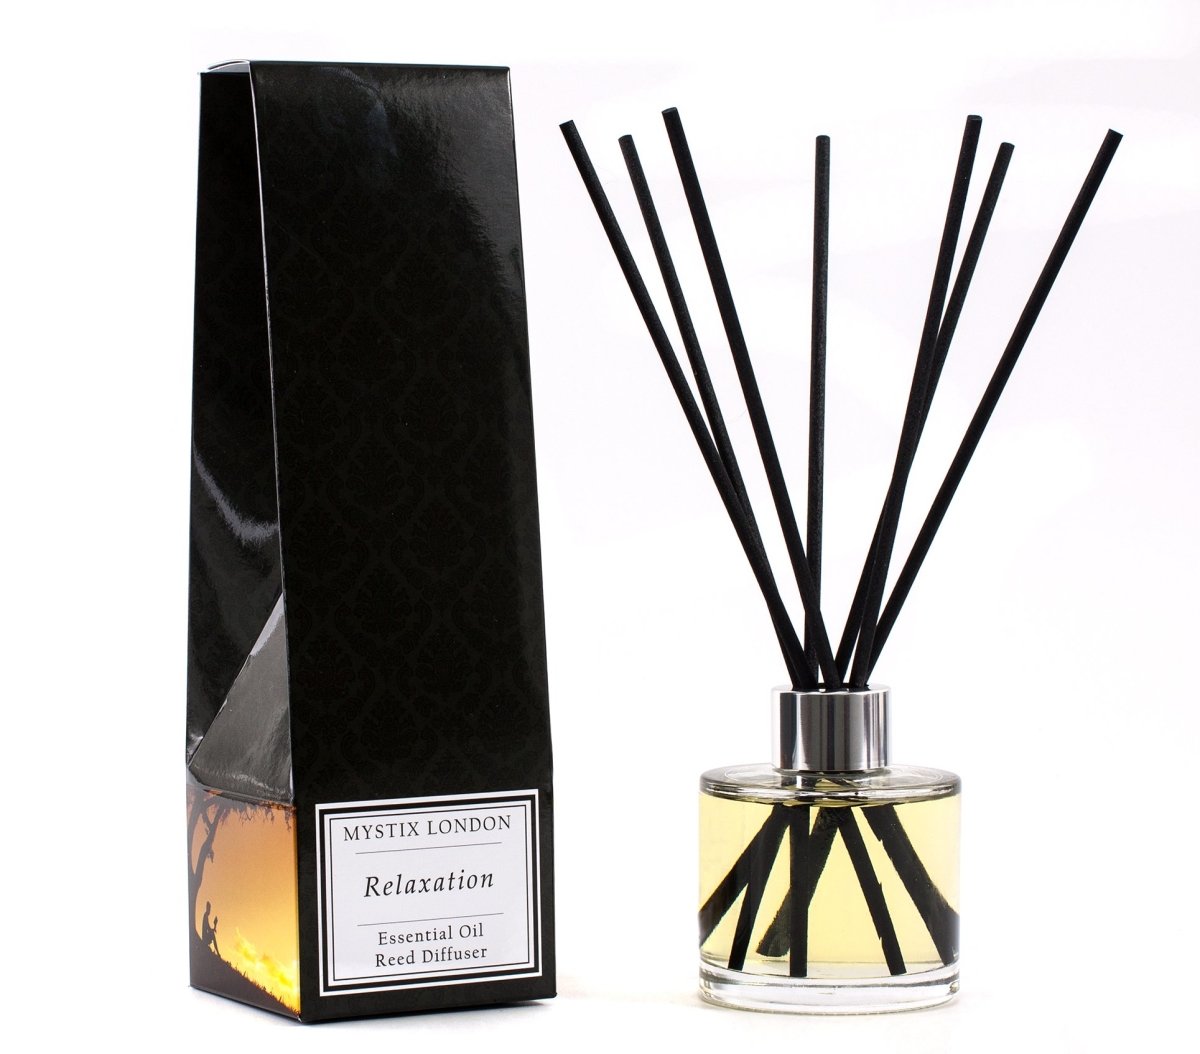 Relaxation - Essential Oil Reed Diffuser - Mystic Moments UK